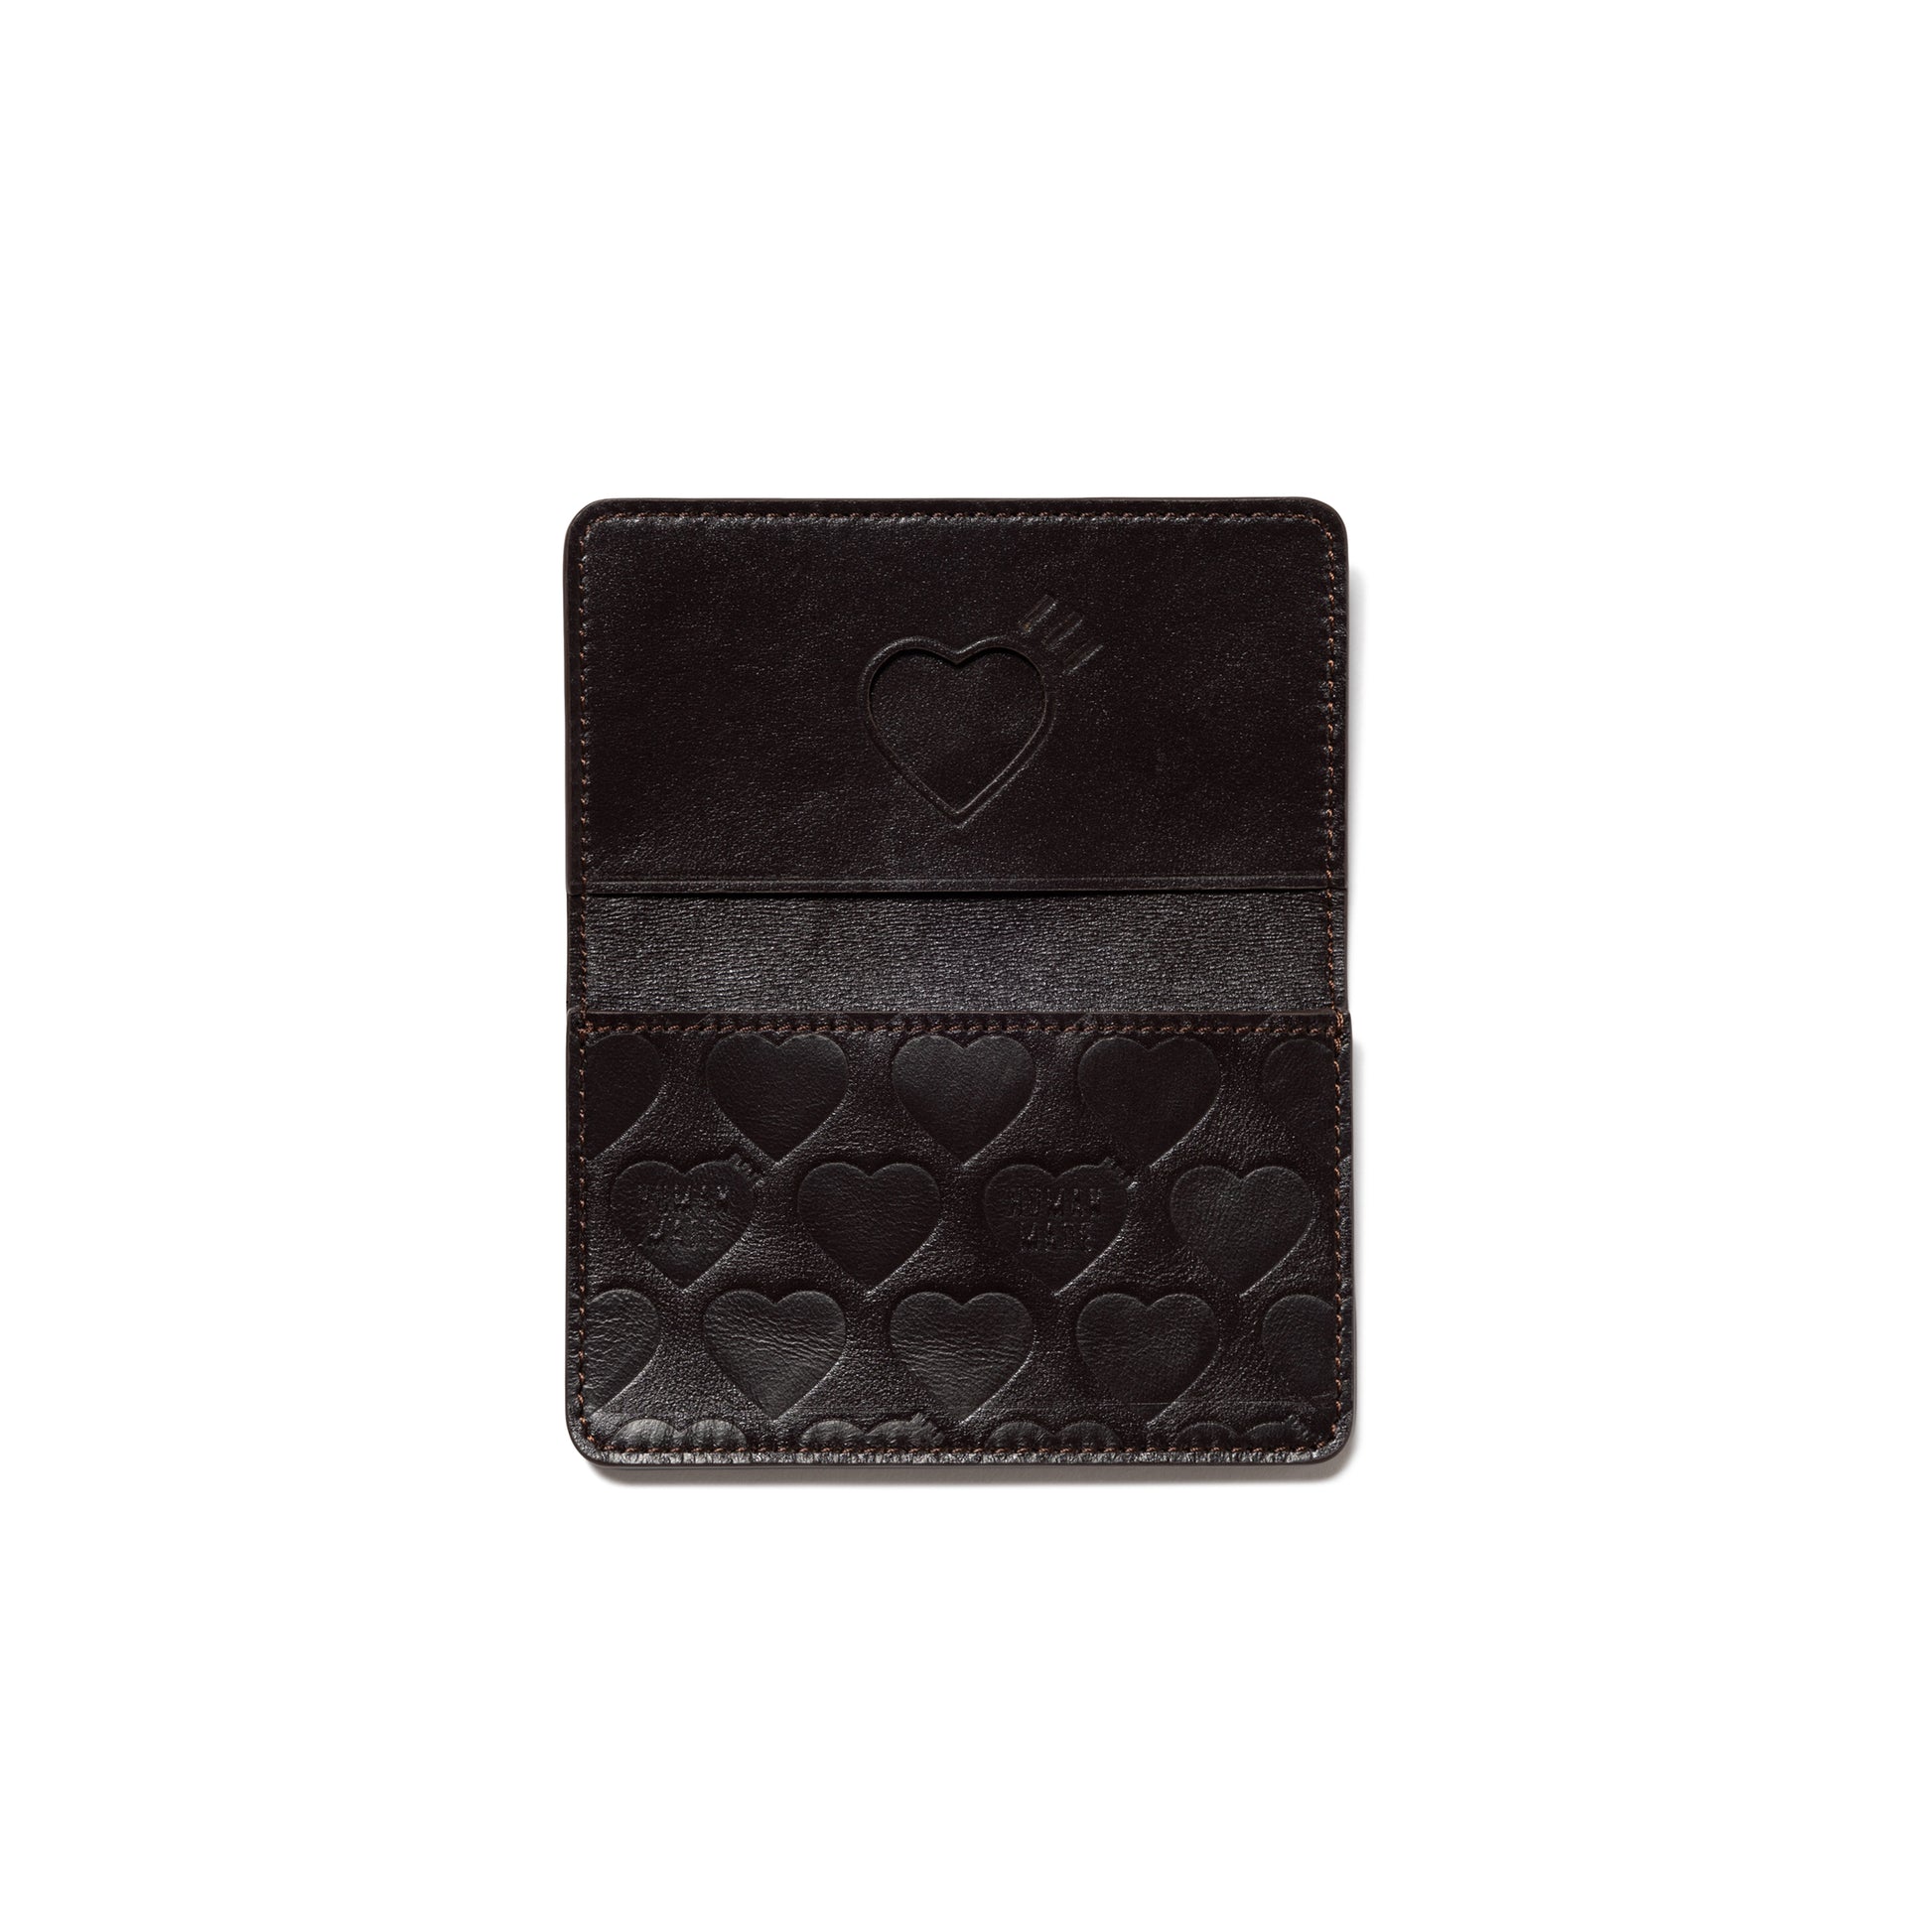 HUMAN MADE LEATHER CARD CASE BW-C